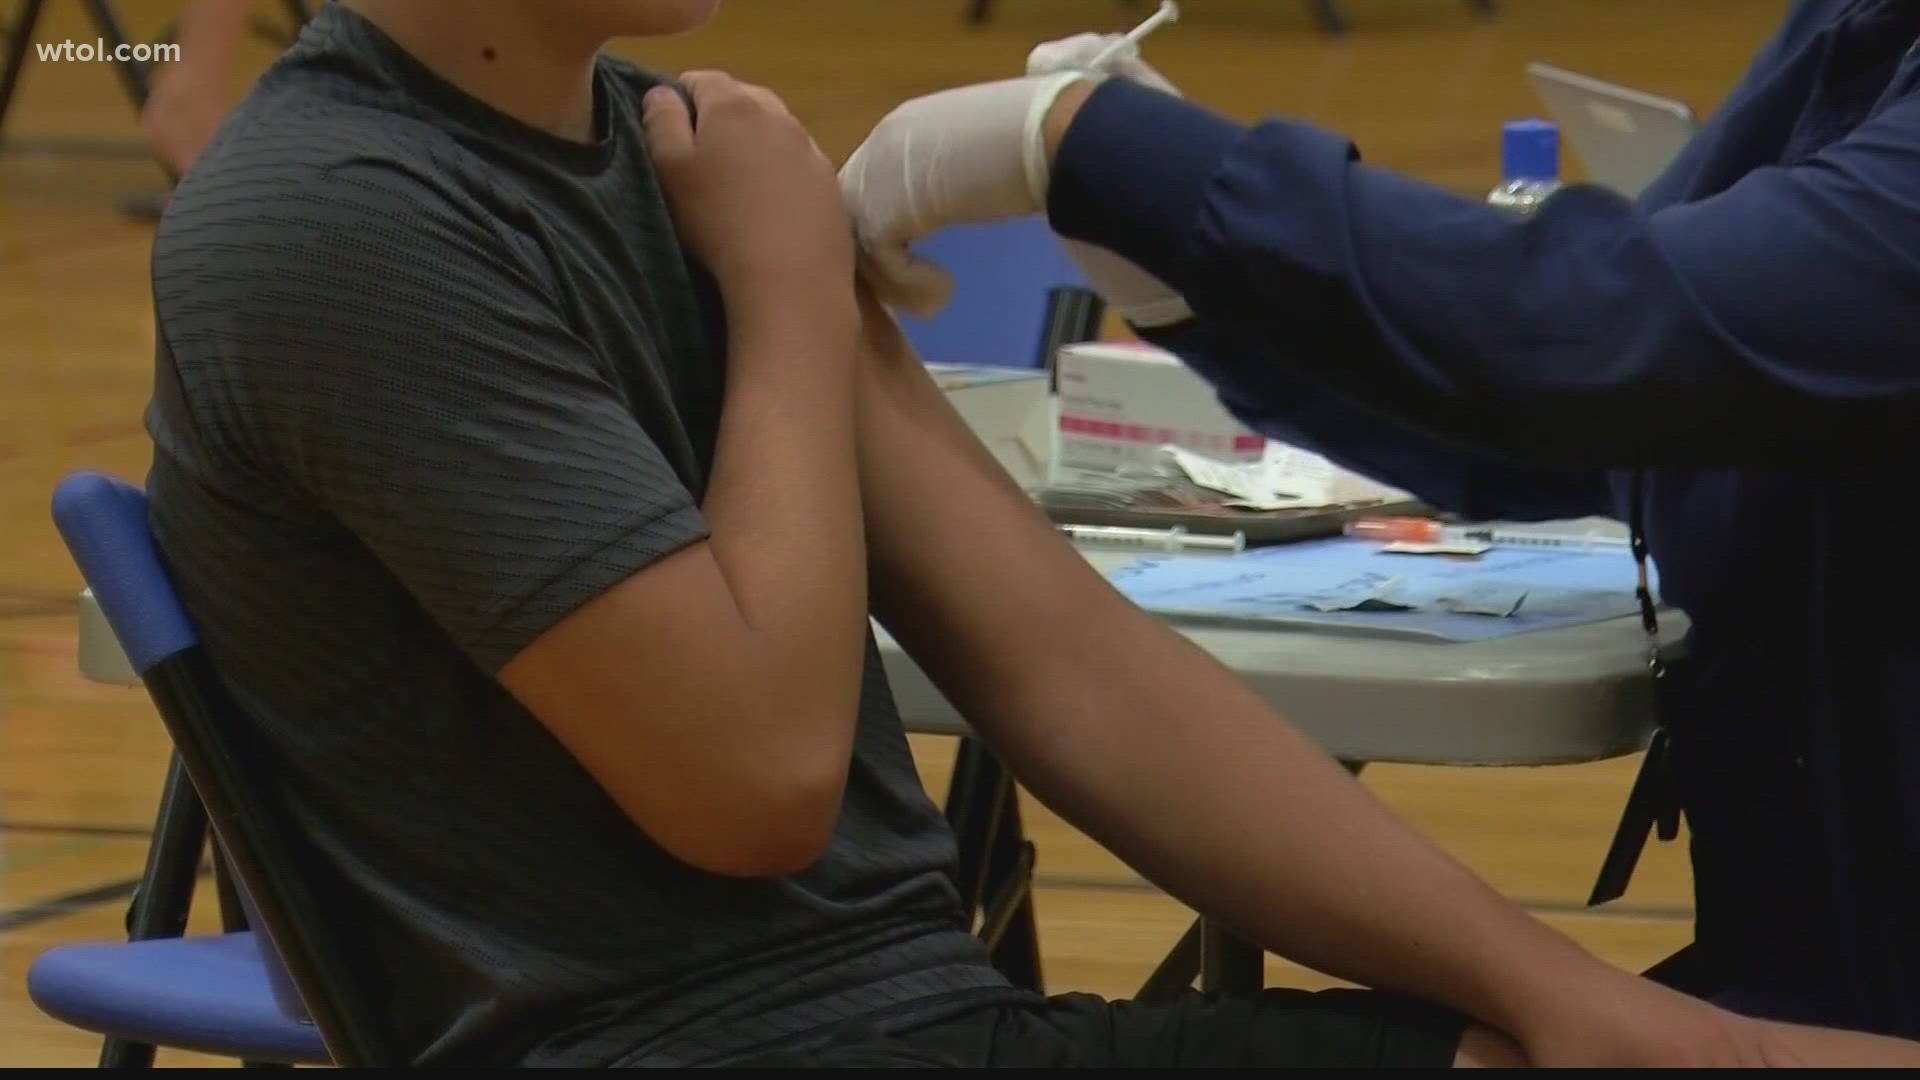 To help make it easier on parents and students, many districts are even holding vaccine clinics